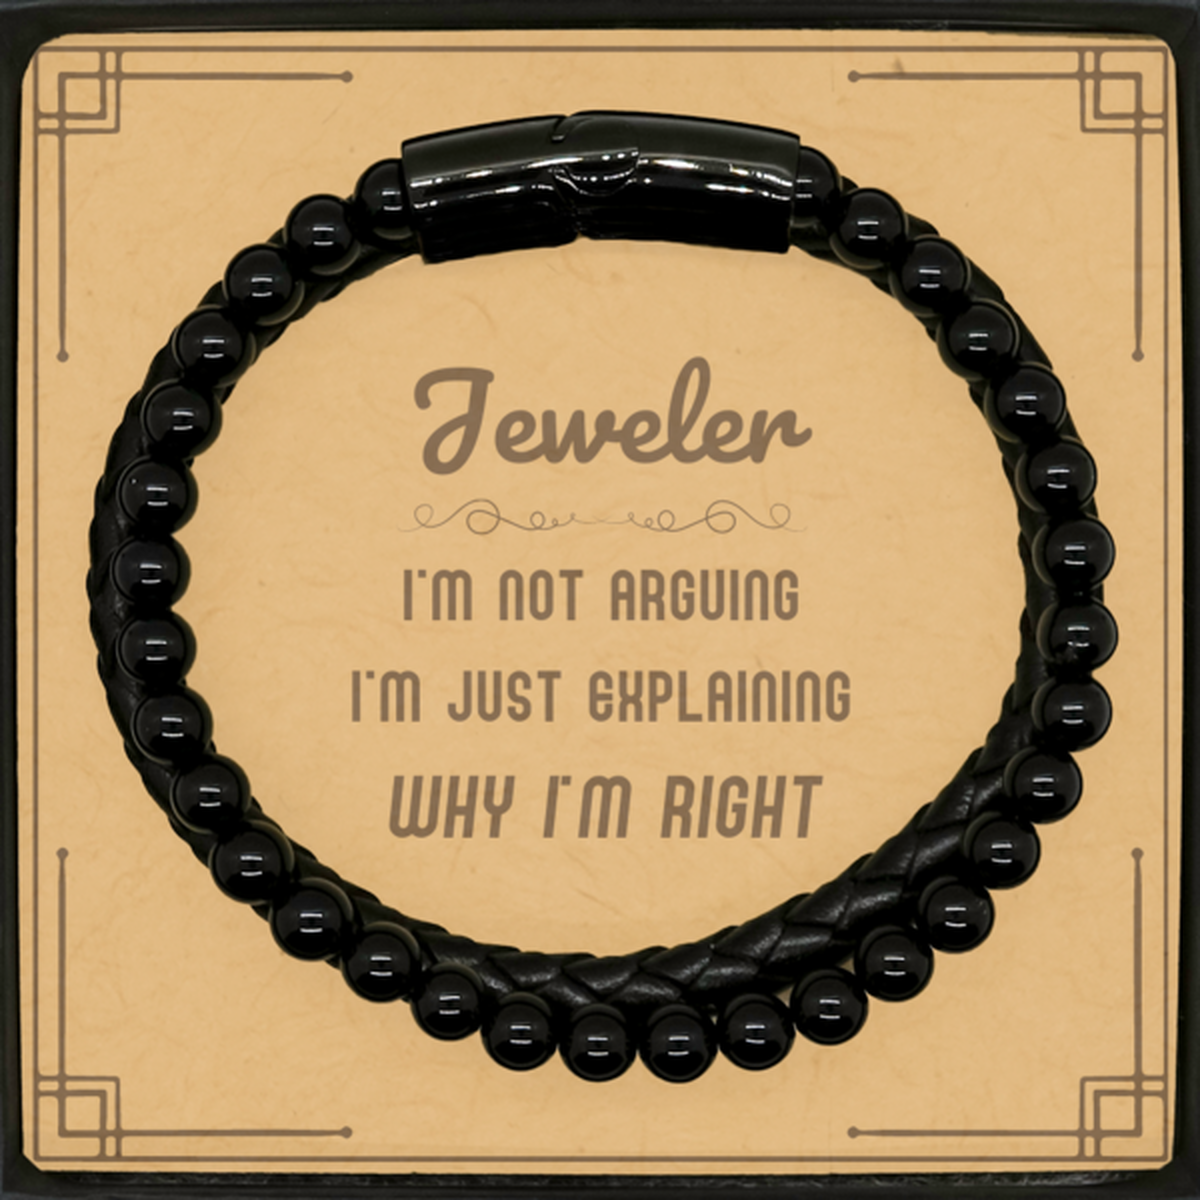 Jeweler I'm not Arguing. I'm Just Explaining Why I'm RIGHT Stone Leather Bracelets, Funny Saying Quote Jeweler Gifts For Jeweler Message Card Graduation Birthday Christmas Gifts for Men Women Coworker